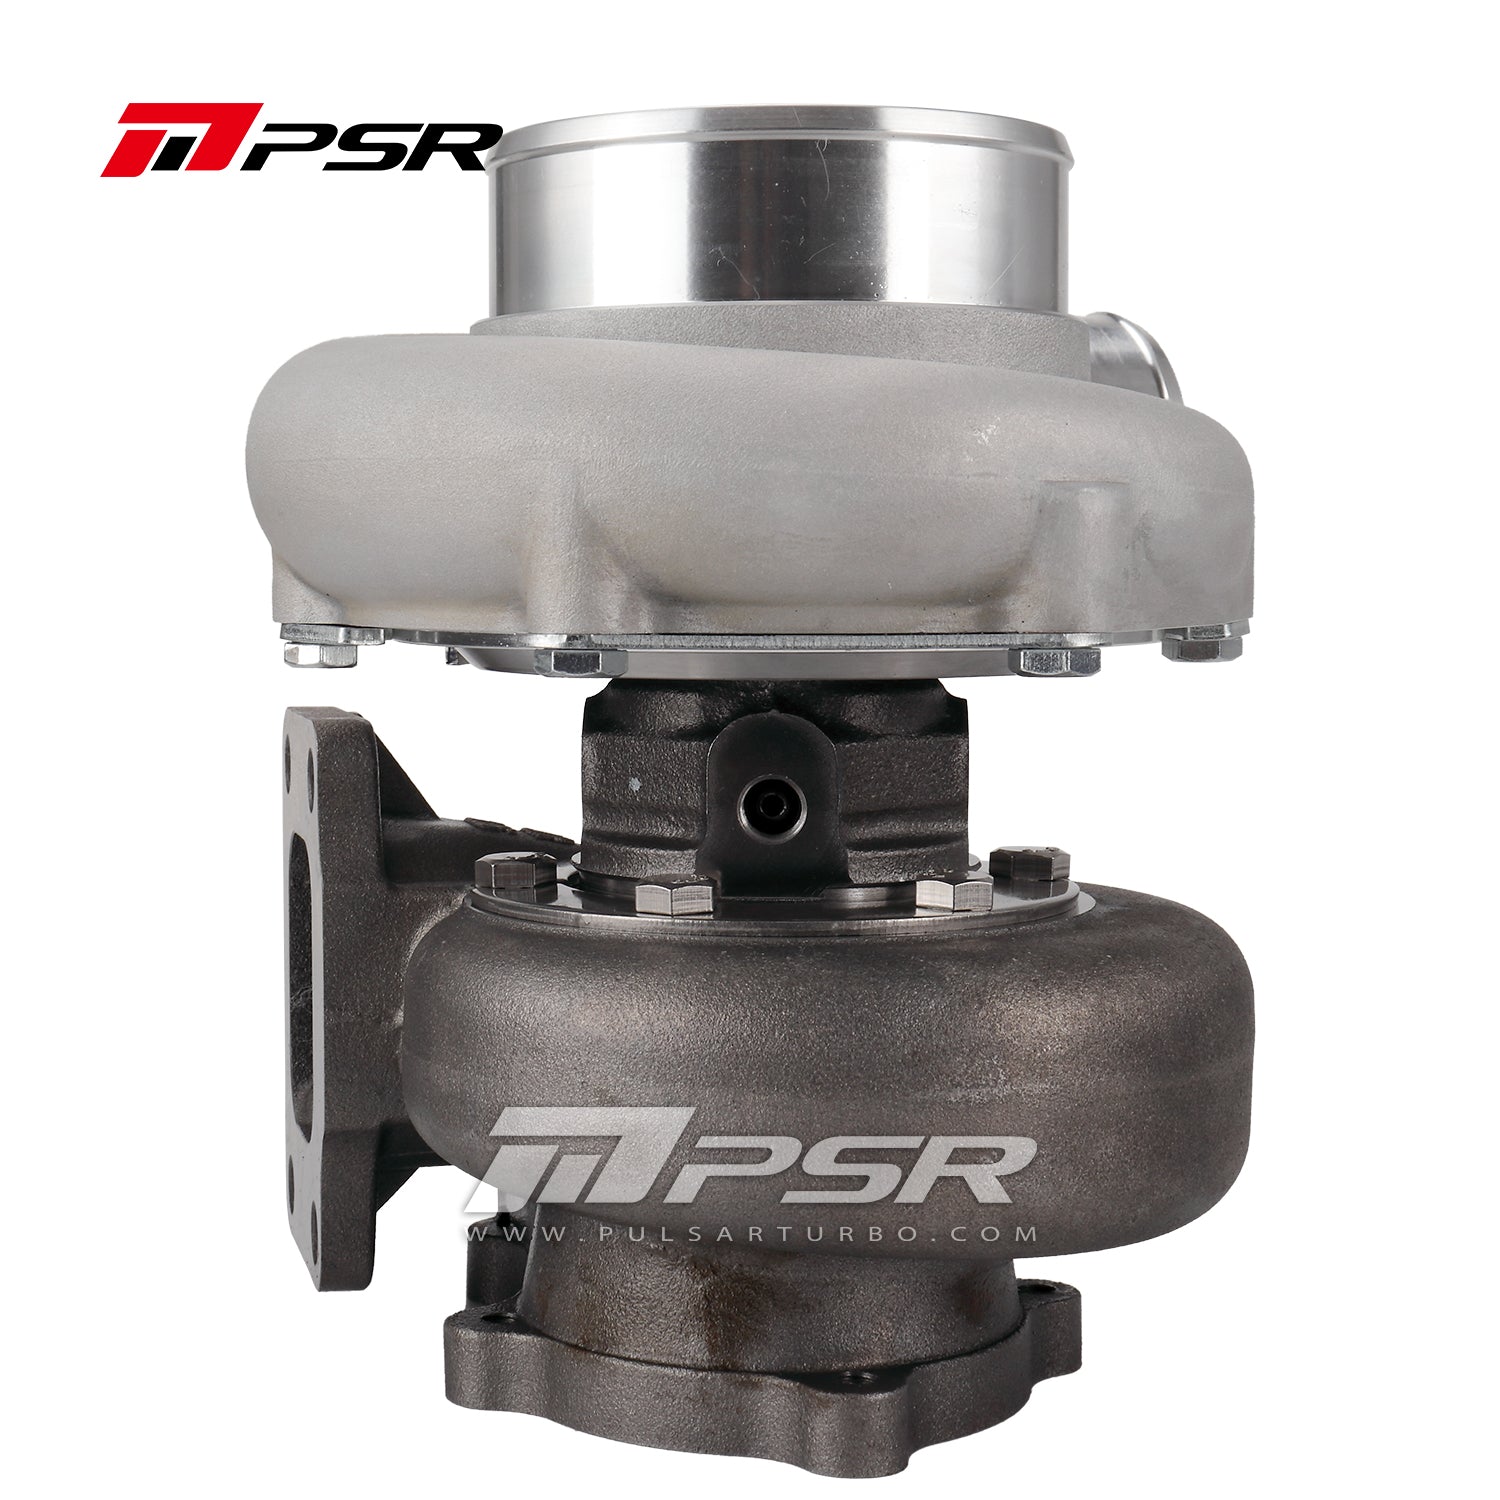 PSR PULSAR Next GEN 6682 for Ford Falcon to replace the factory GT3582 turbo